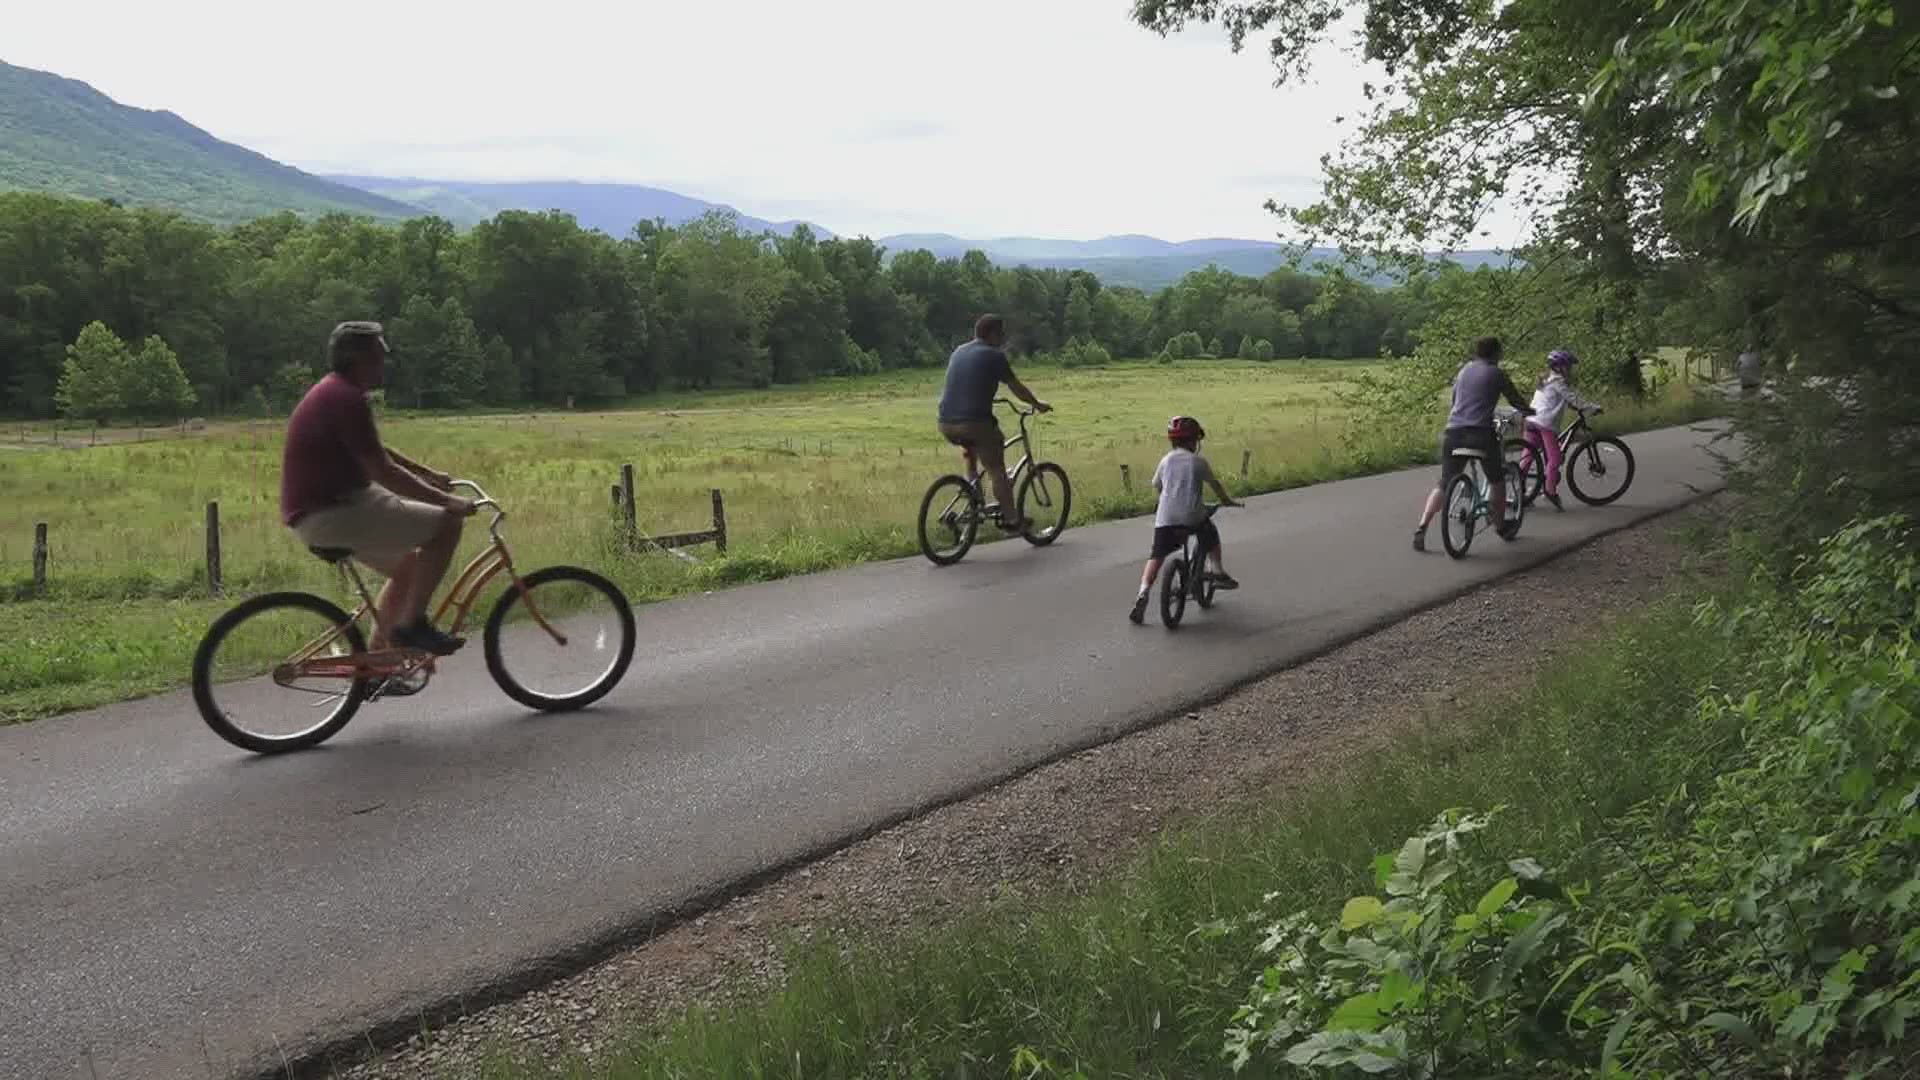 Every Wednesday the national park is shutting off vehicle traffic in Cades Cove. It started June 17 as a pilot program.